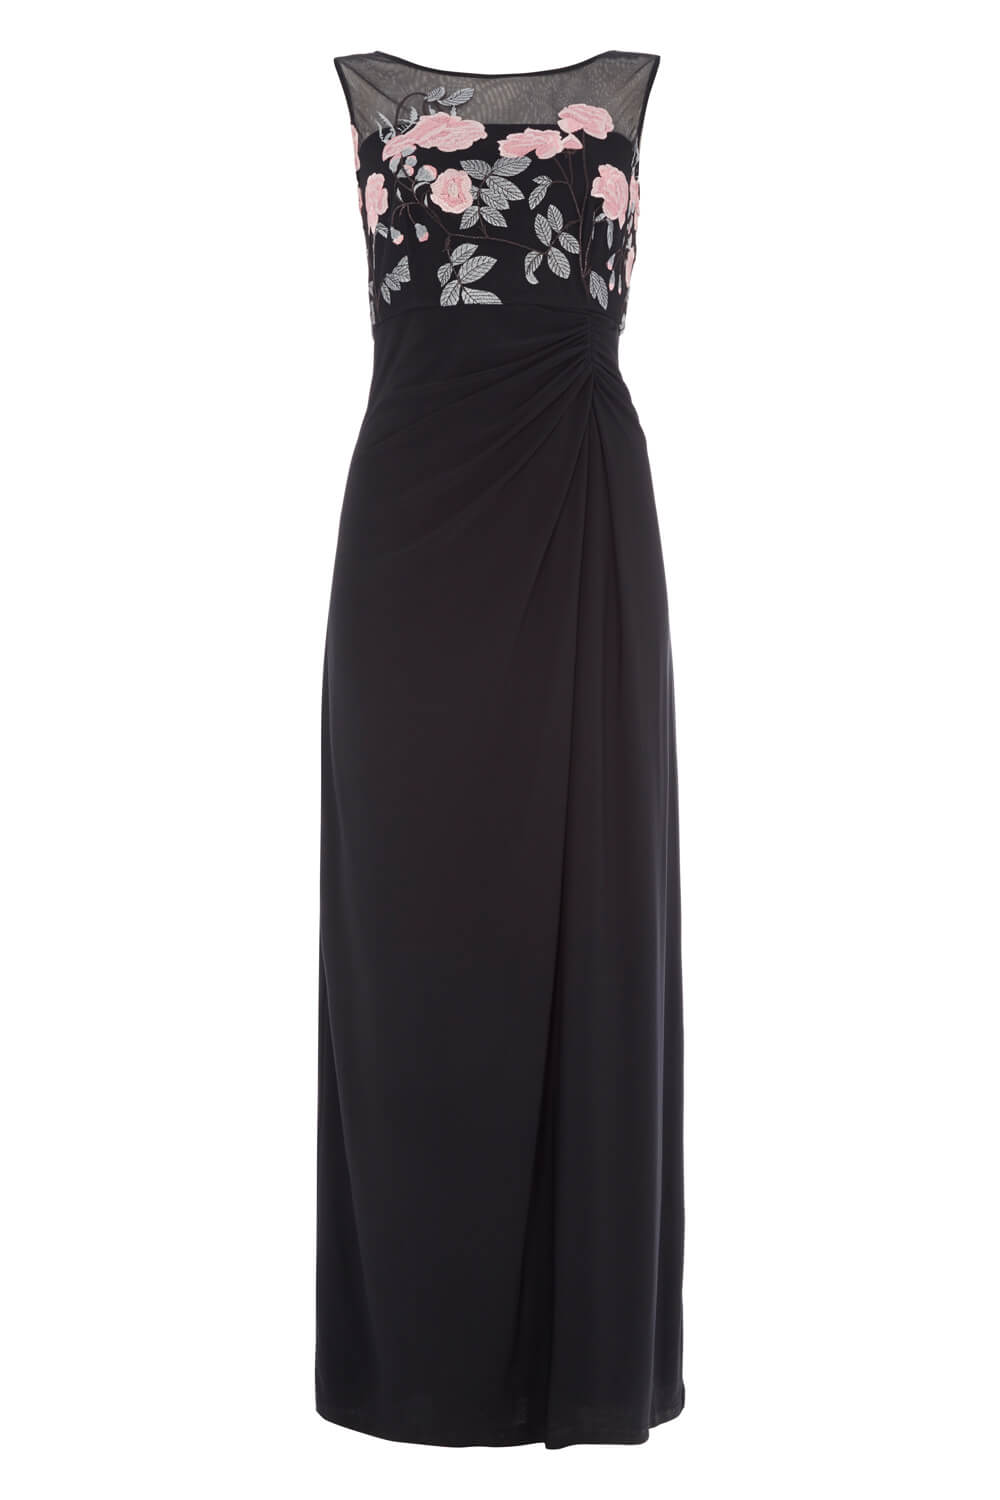 Black Rose Embroidered Maxi Dress, Image 4 of 4